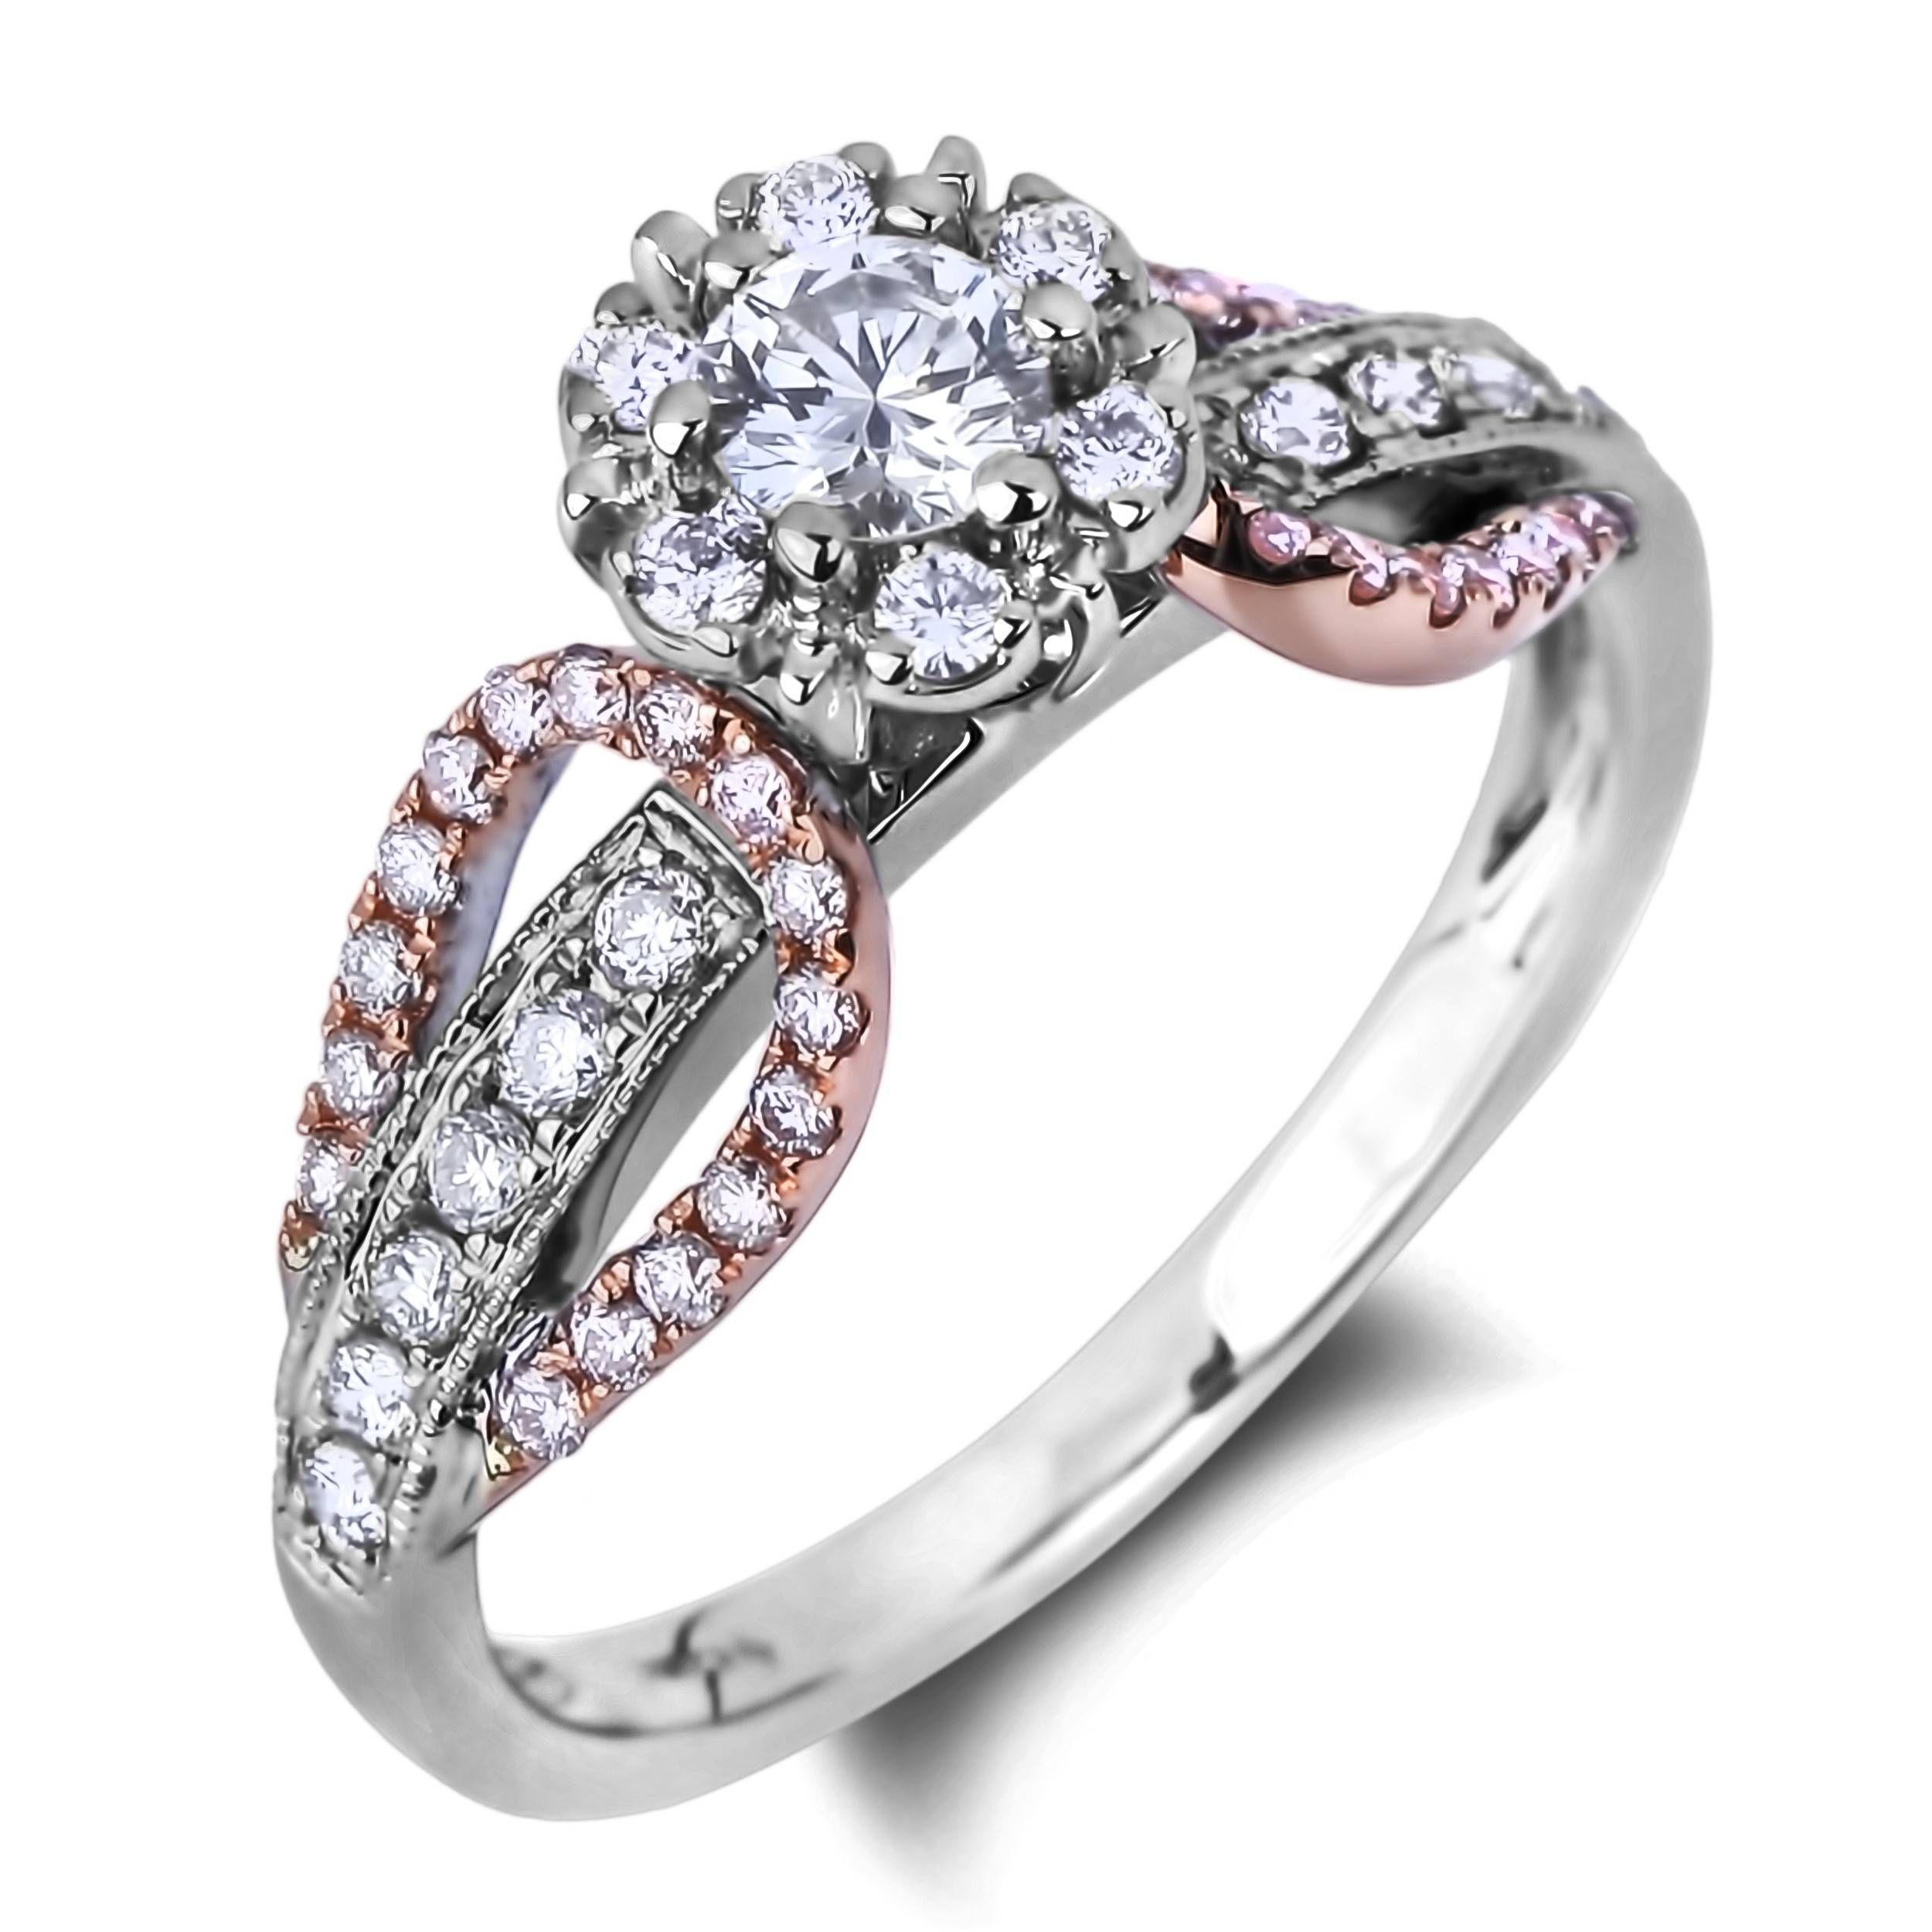 15 Inspirations of Western Wedding Rings For Women